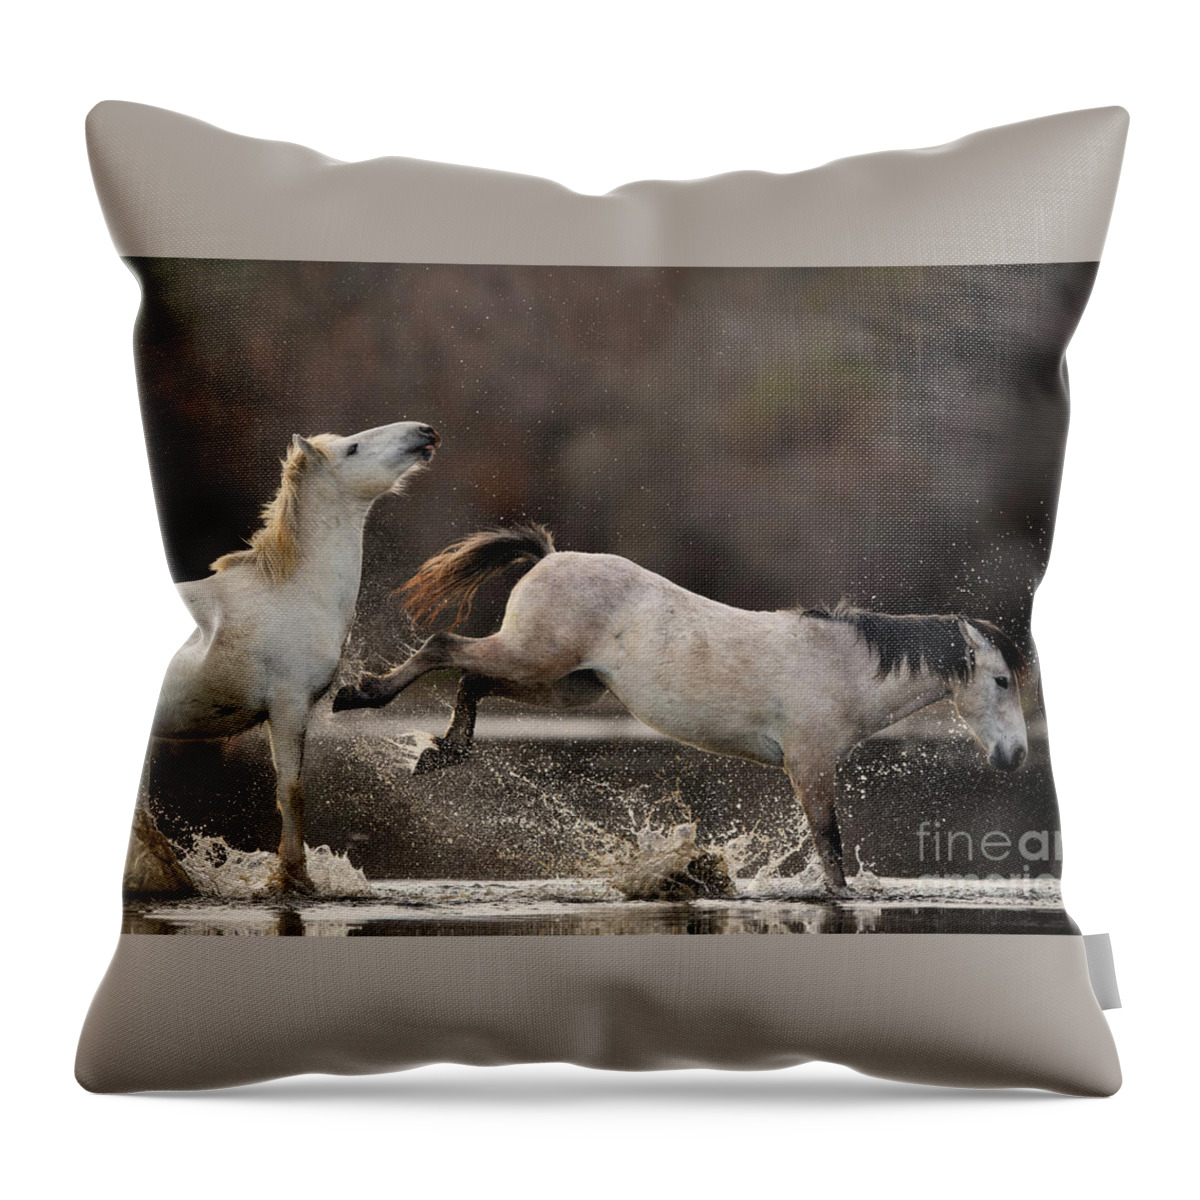 Salt River Wild Horses Throw Pillow featuring the photograph The Kick 2 by Shannon Hastings